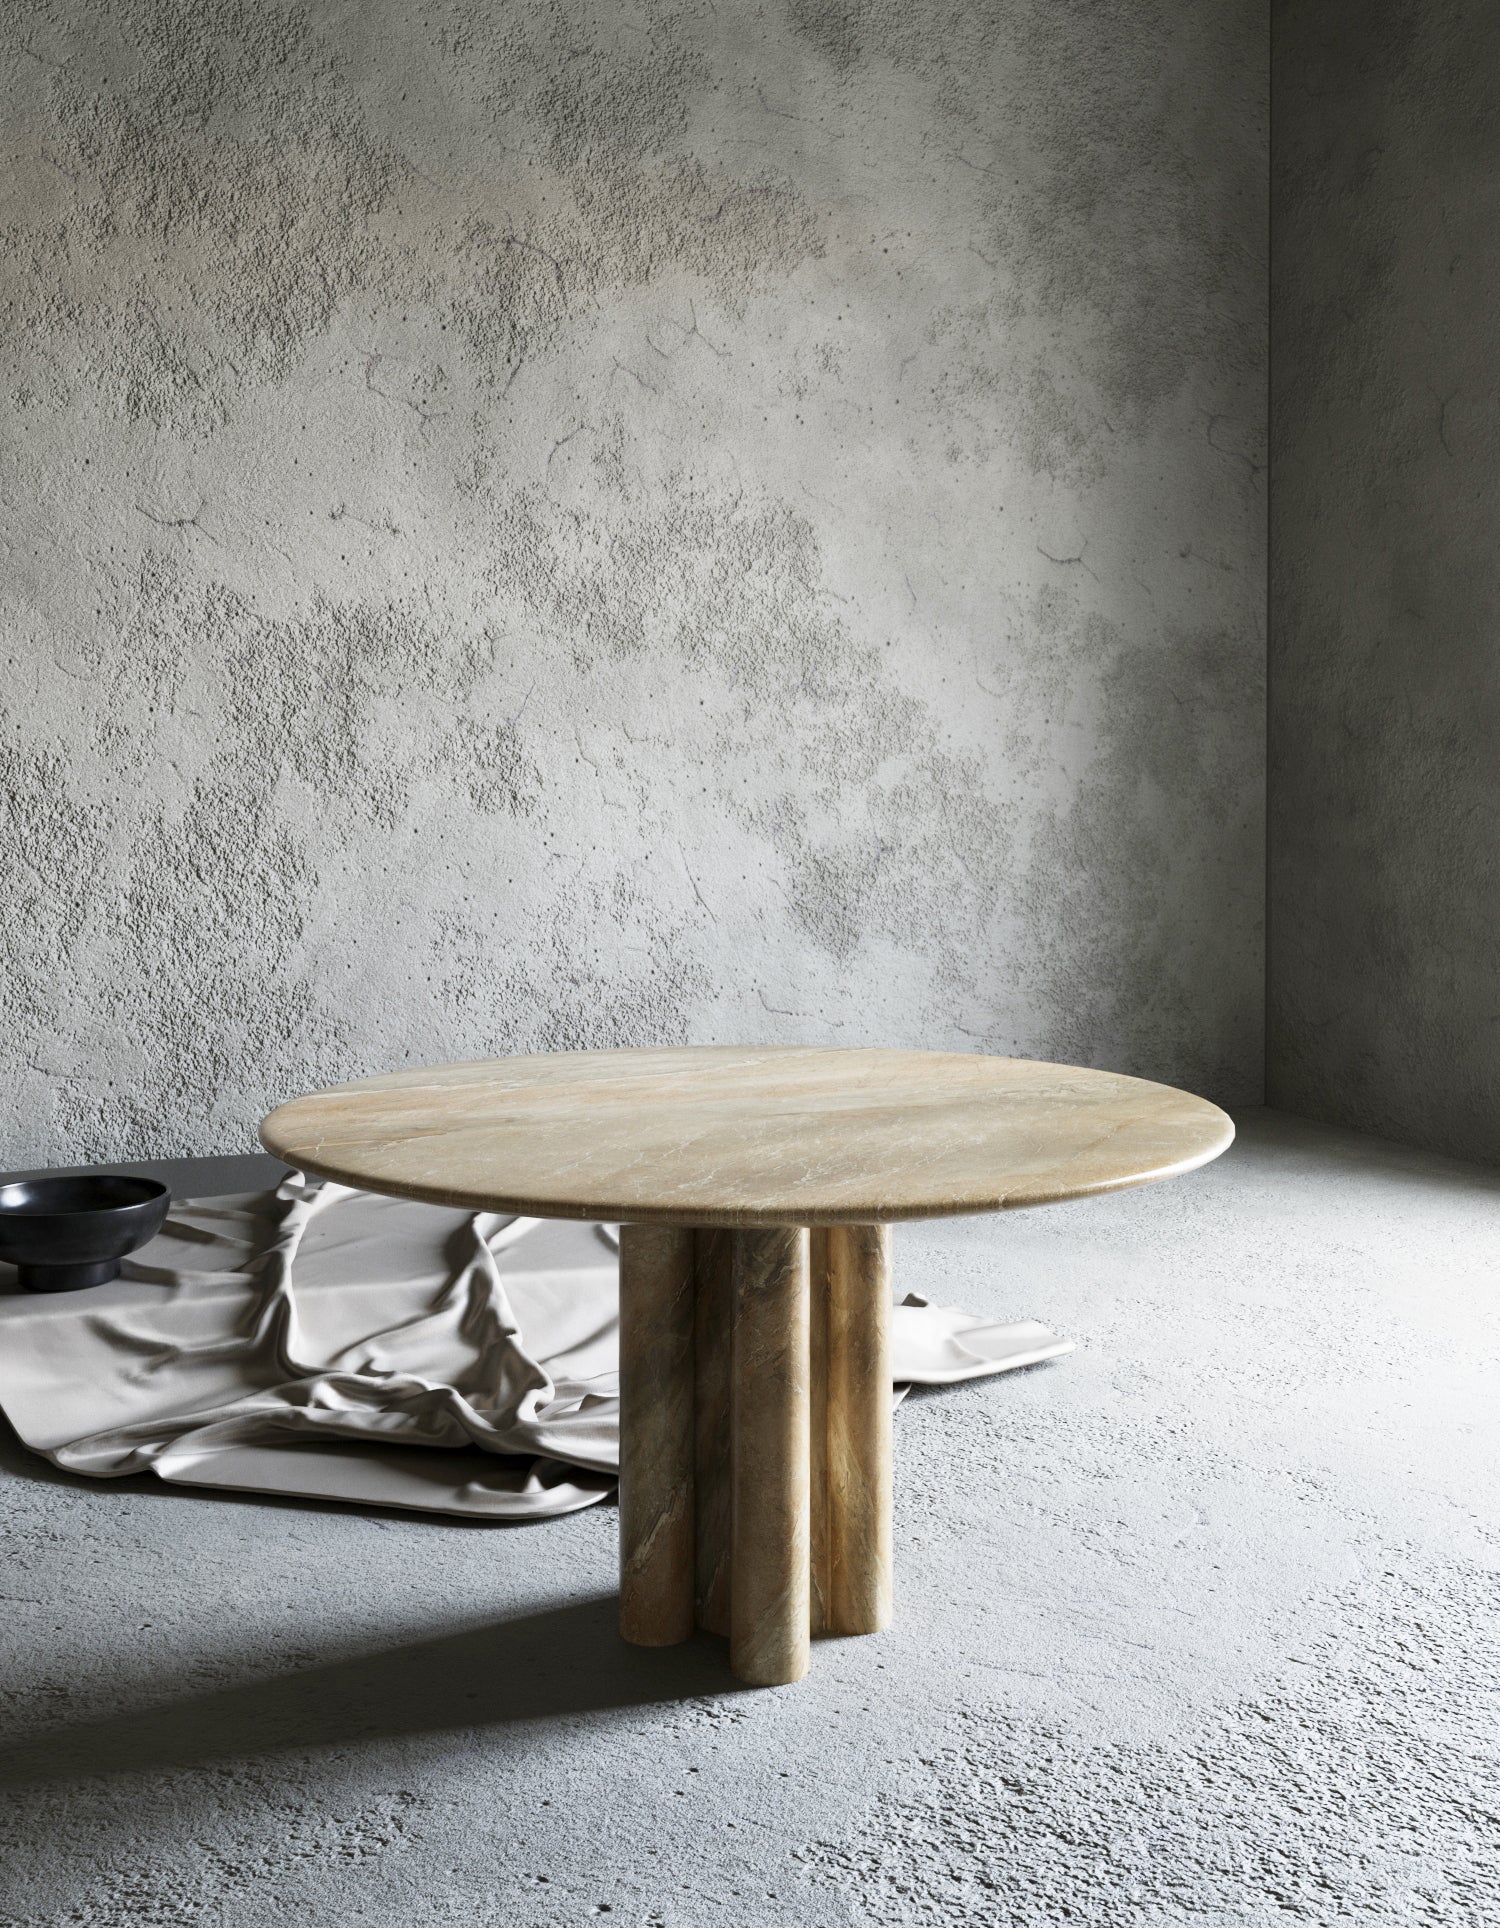 Orthogonals Marble Dining Table by STUDIO IB MILANO
Signed
Limited Edition
Dimensions: D 150 x H 75 cm.
Materials: Onice Miele marble.

Also available in other stones.

Ina Borisova is the creative force behind Studio IB Milano. With a diverse